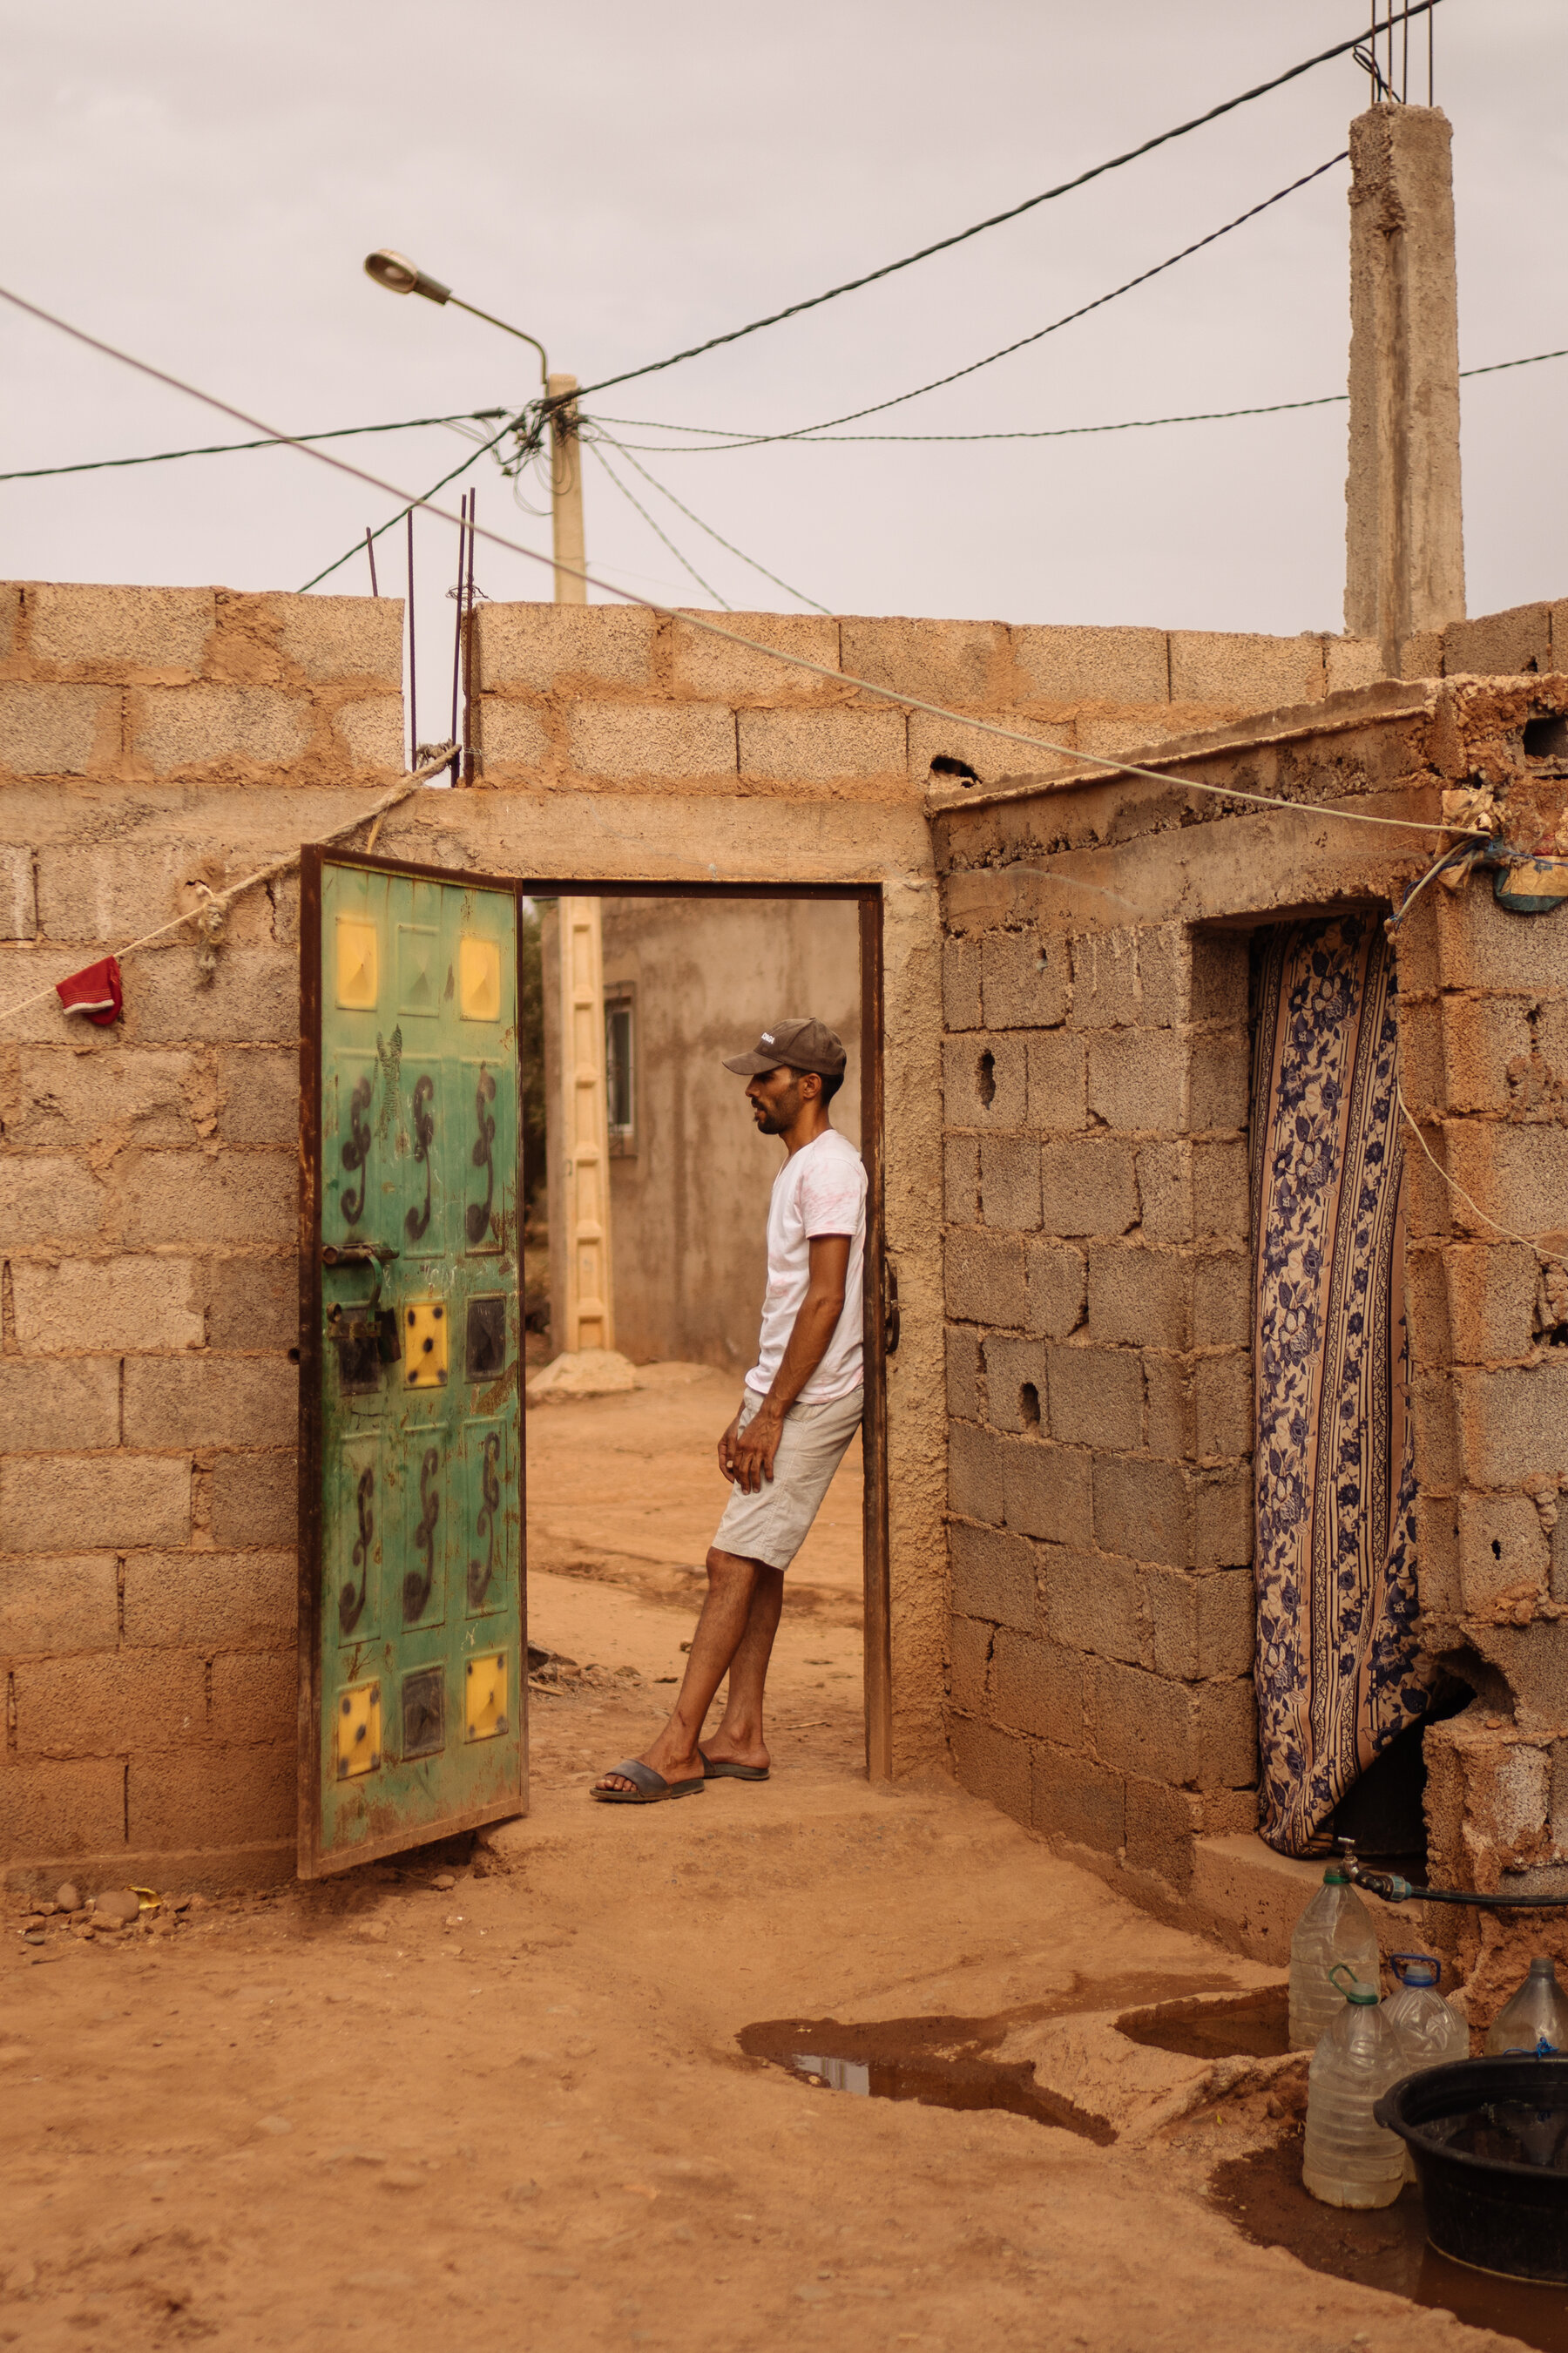 A man in a white t-shirt and shorts leaning against the open doorway of a cinderblock house.